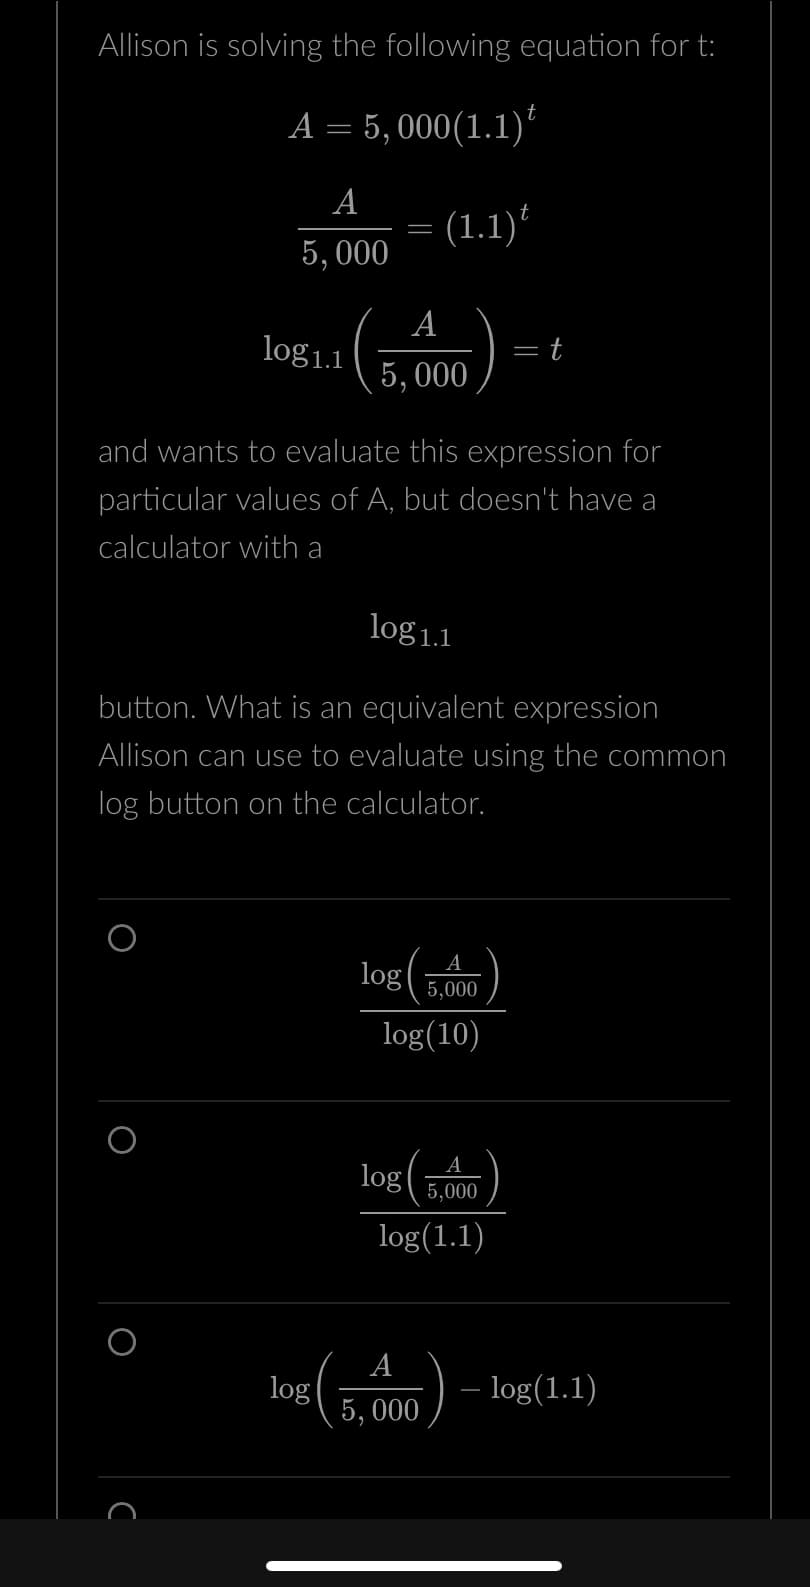 Allison is solving the following equation for t:
A = 5,000(1.1) ¹
A
5,000
log1.1
O
с
=
A
5,000
and wants to evaluate this expression for
particular values of A, but doesn't have a
calculator with a
log 1.1
button. What is an equivalent expression
Allison can use to evaluate using the common
log button on the calculator.
(1.1)
log(
5,000
log(10)
log
A
5,000
log(1.1)
= t
A
log
5, 000
- log(1.1)